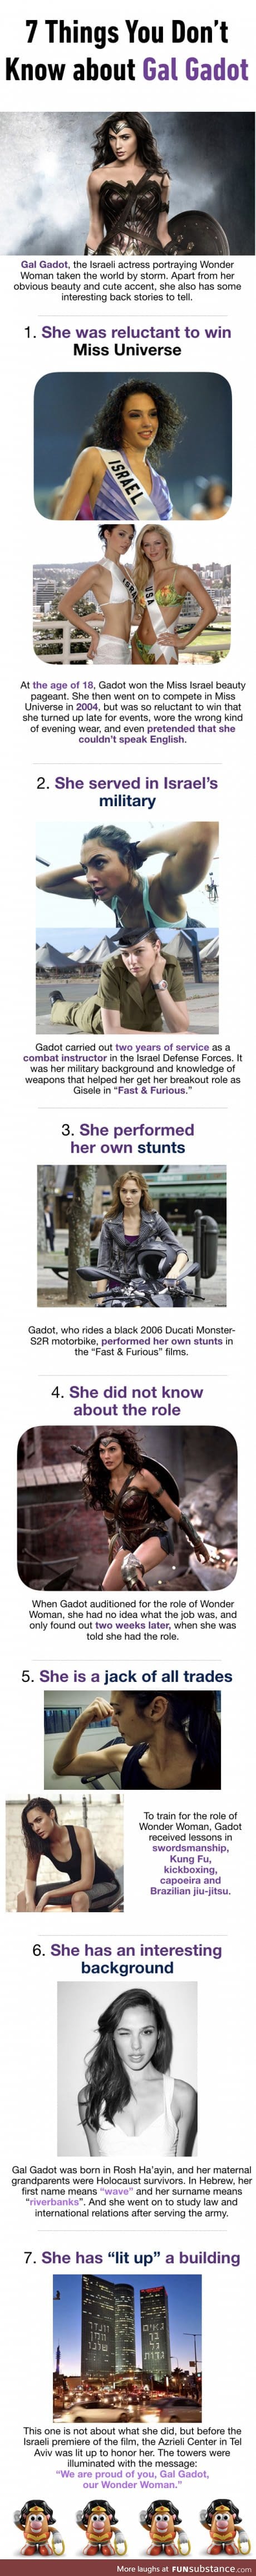 7 Facts You Don't Know About Gal Gadot